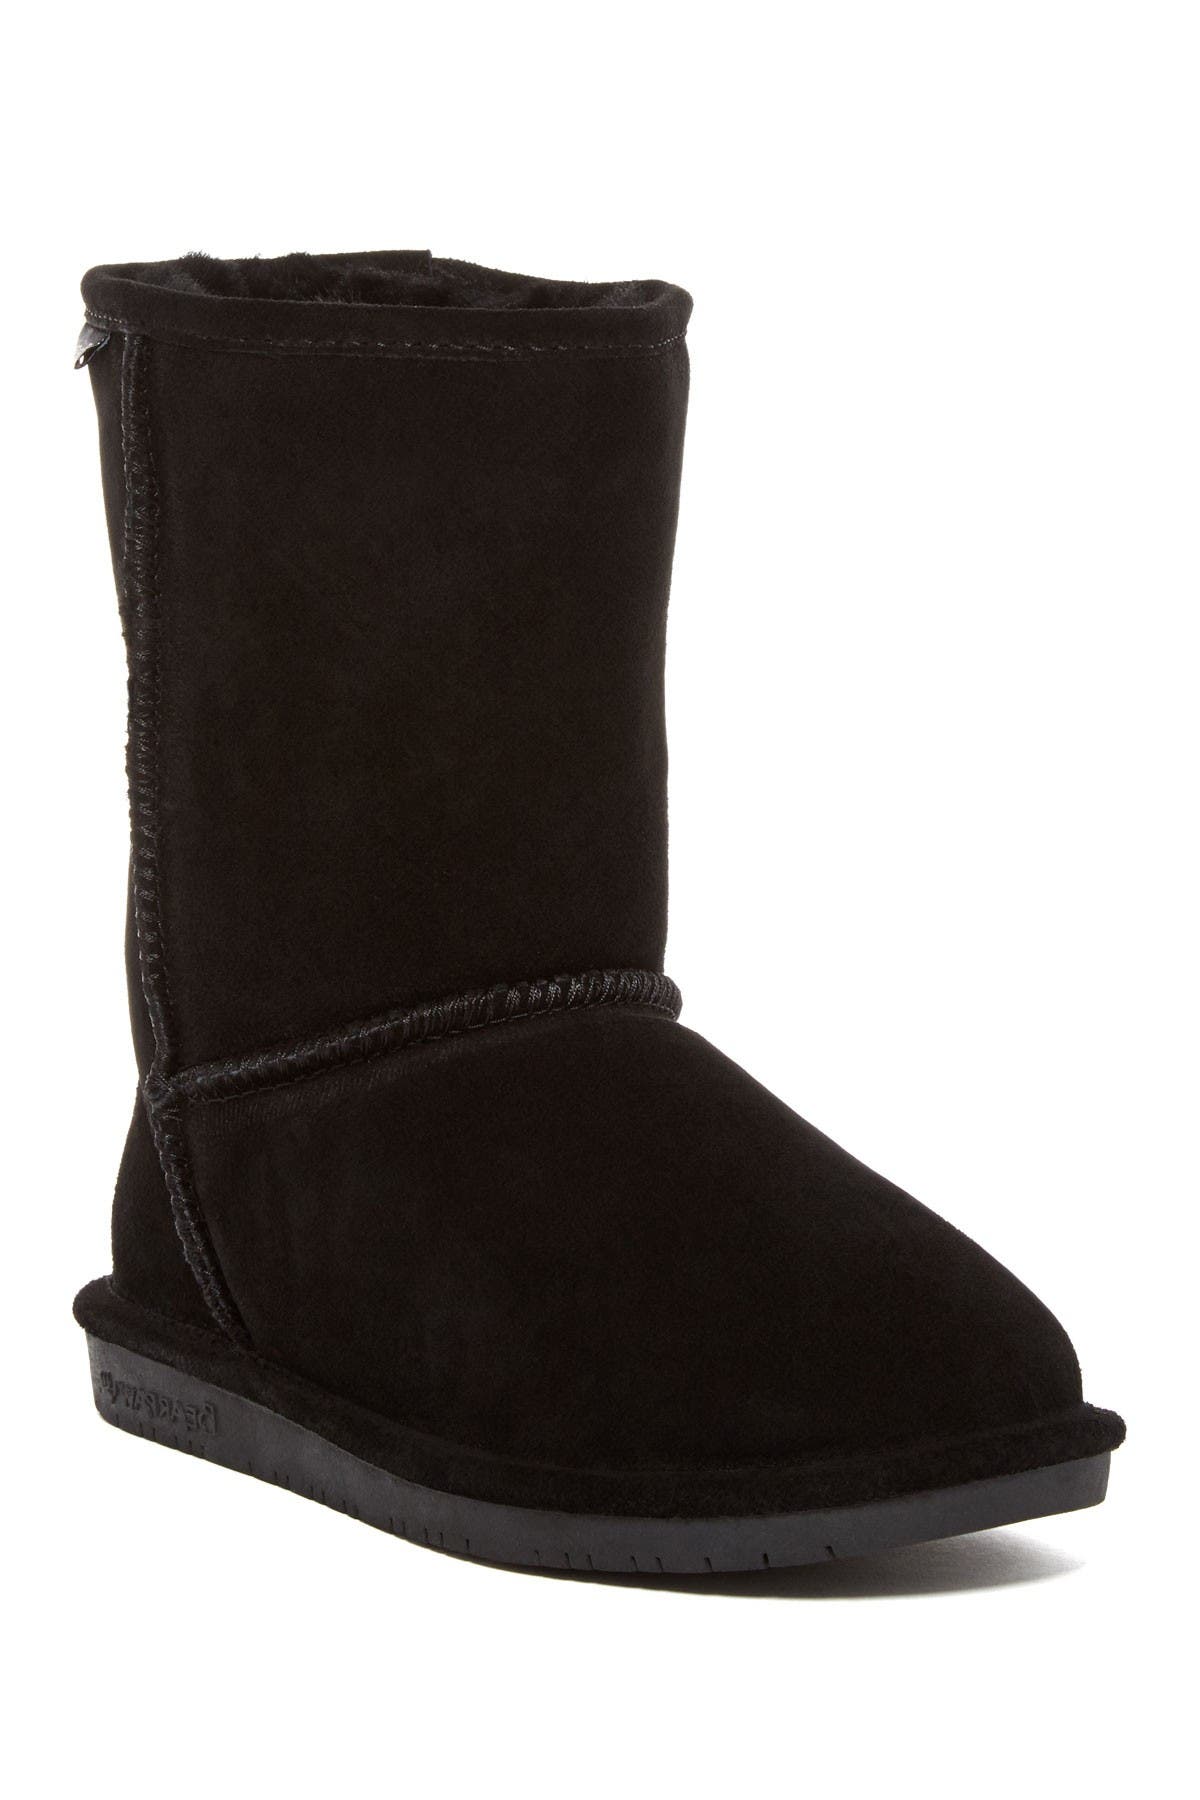 bearpaw boots outlet